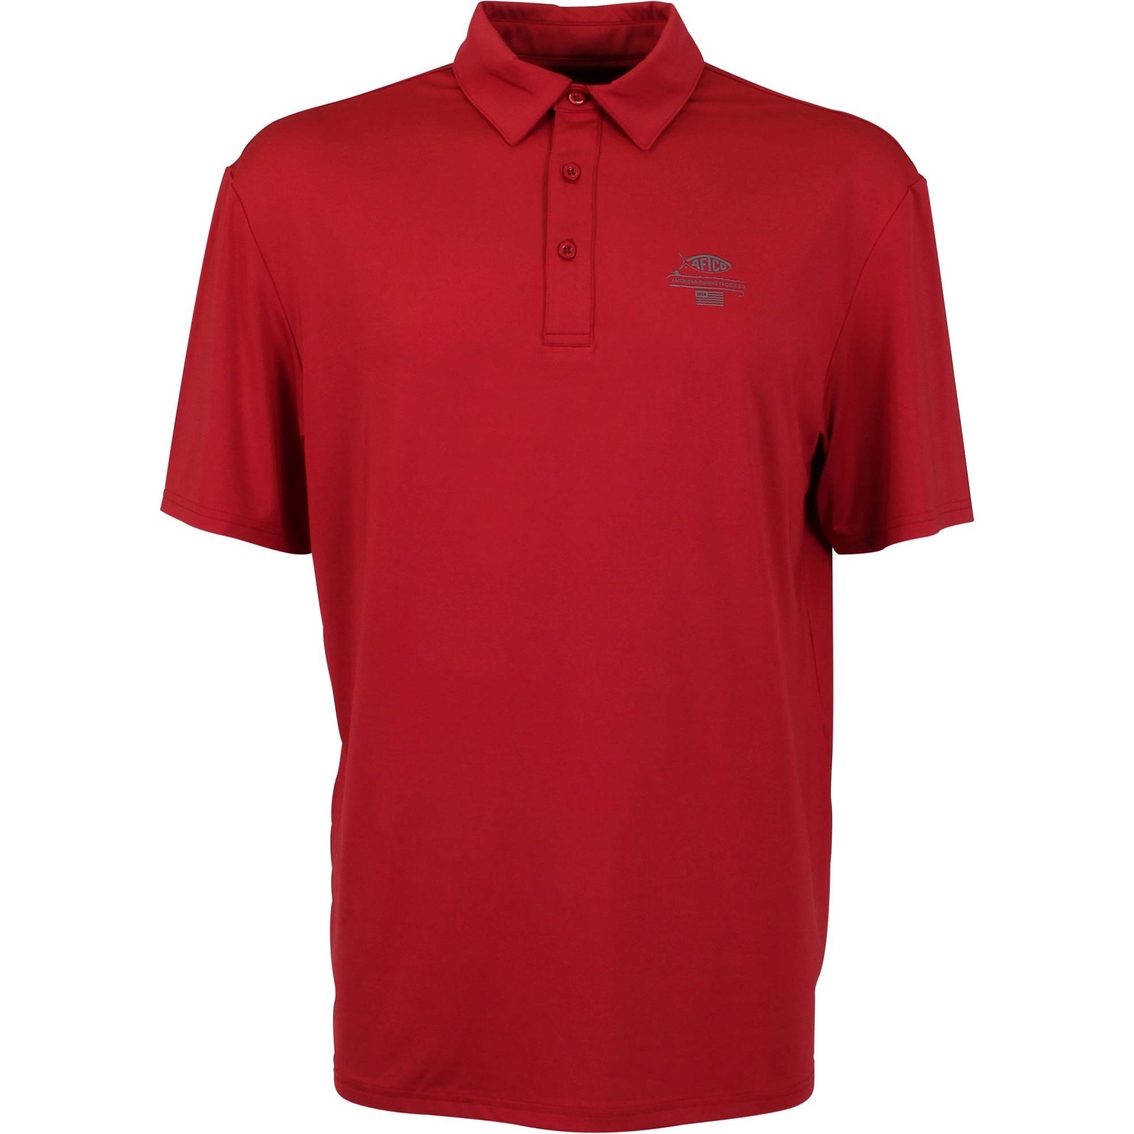 Aftco Wellington Polo Shirt | Shirts | Clothing & Accessories | Shop The Exchange